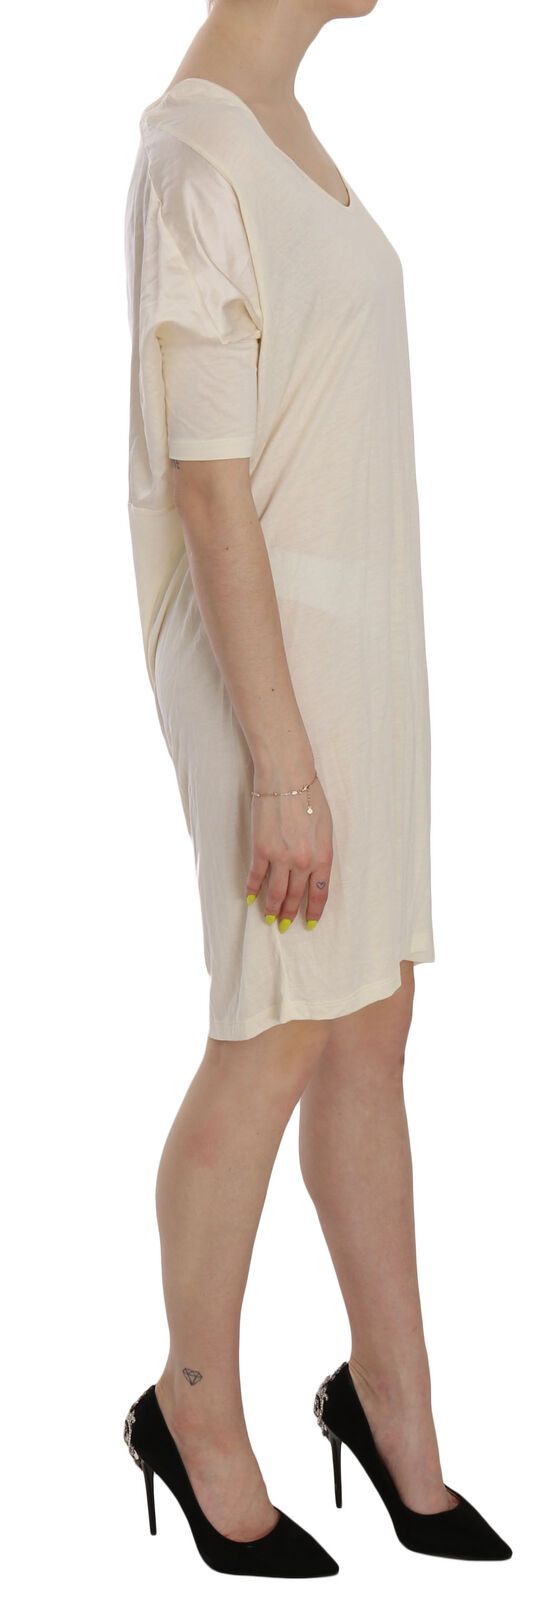 Costume National Chic Cream A-Line Elbow Sleeve Dress